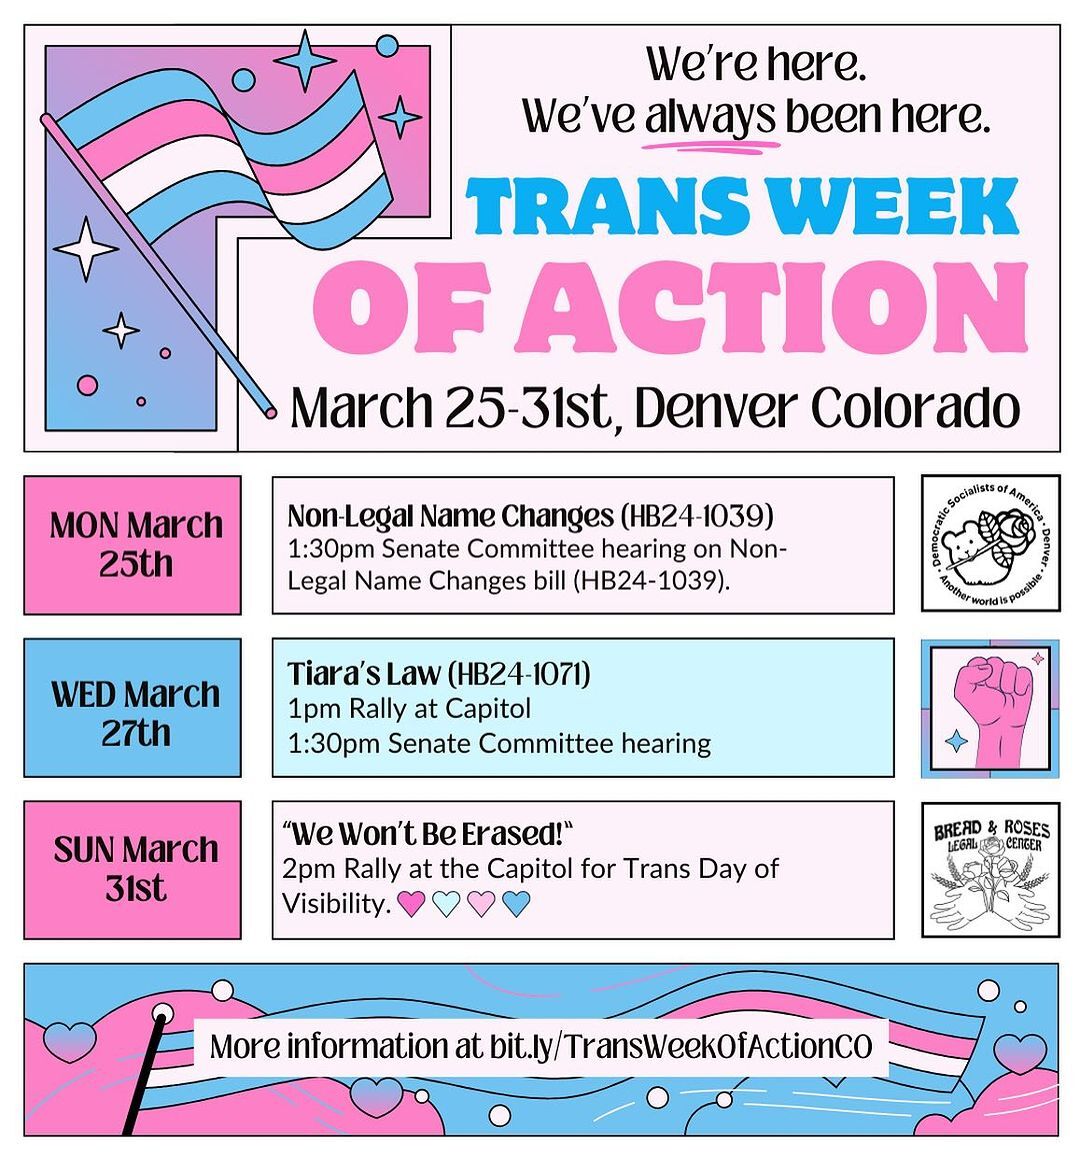 Trans rights are under attack, and we're fighting back! Join Denver DSA and @breadroseslaw for Trans Week of Action Colorado. Let's help pass two bills for trans rights, and rally for #TDOV📷 on Sunday. Go to bit.ly/TransWeekofAct… for all the details.